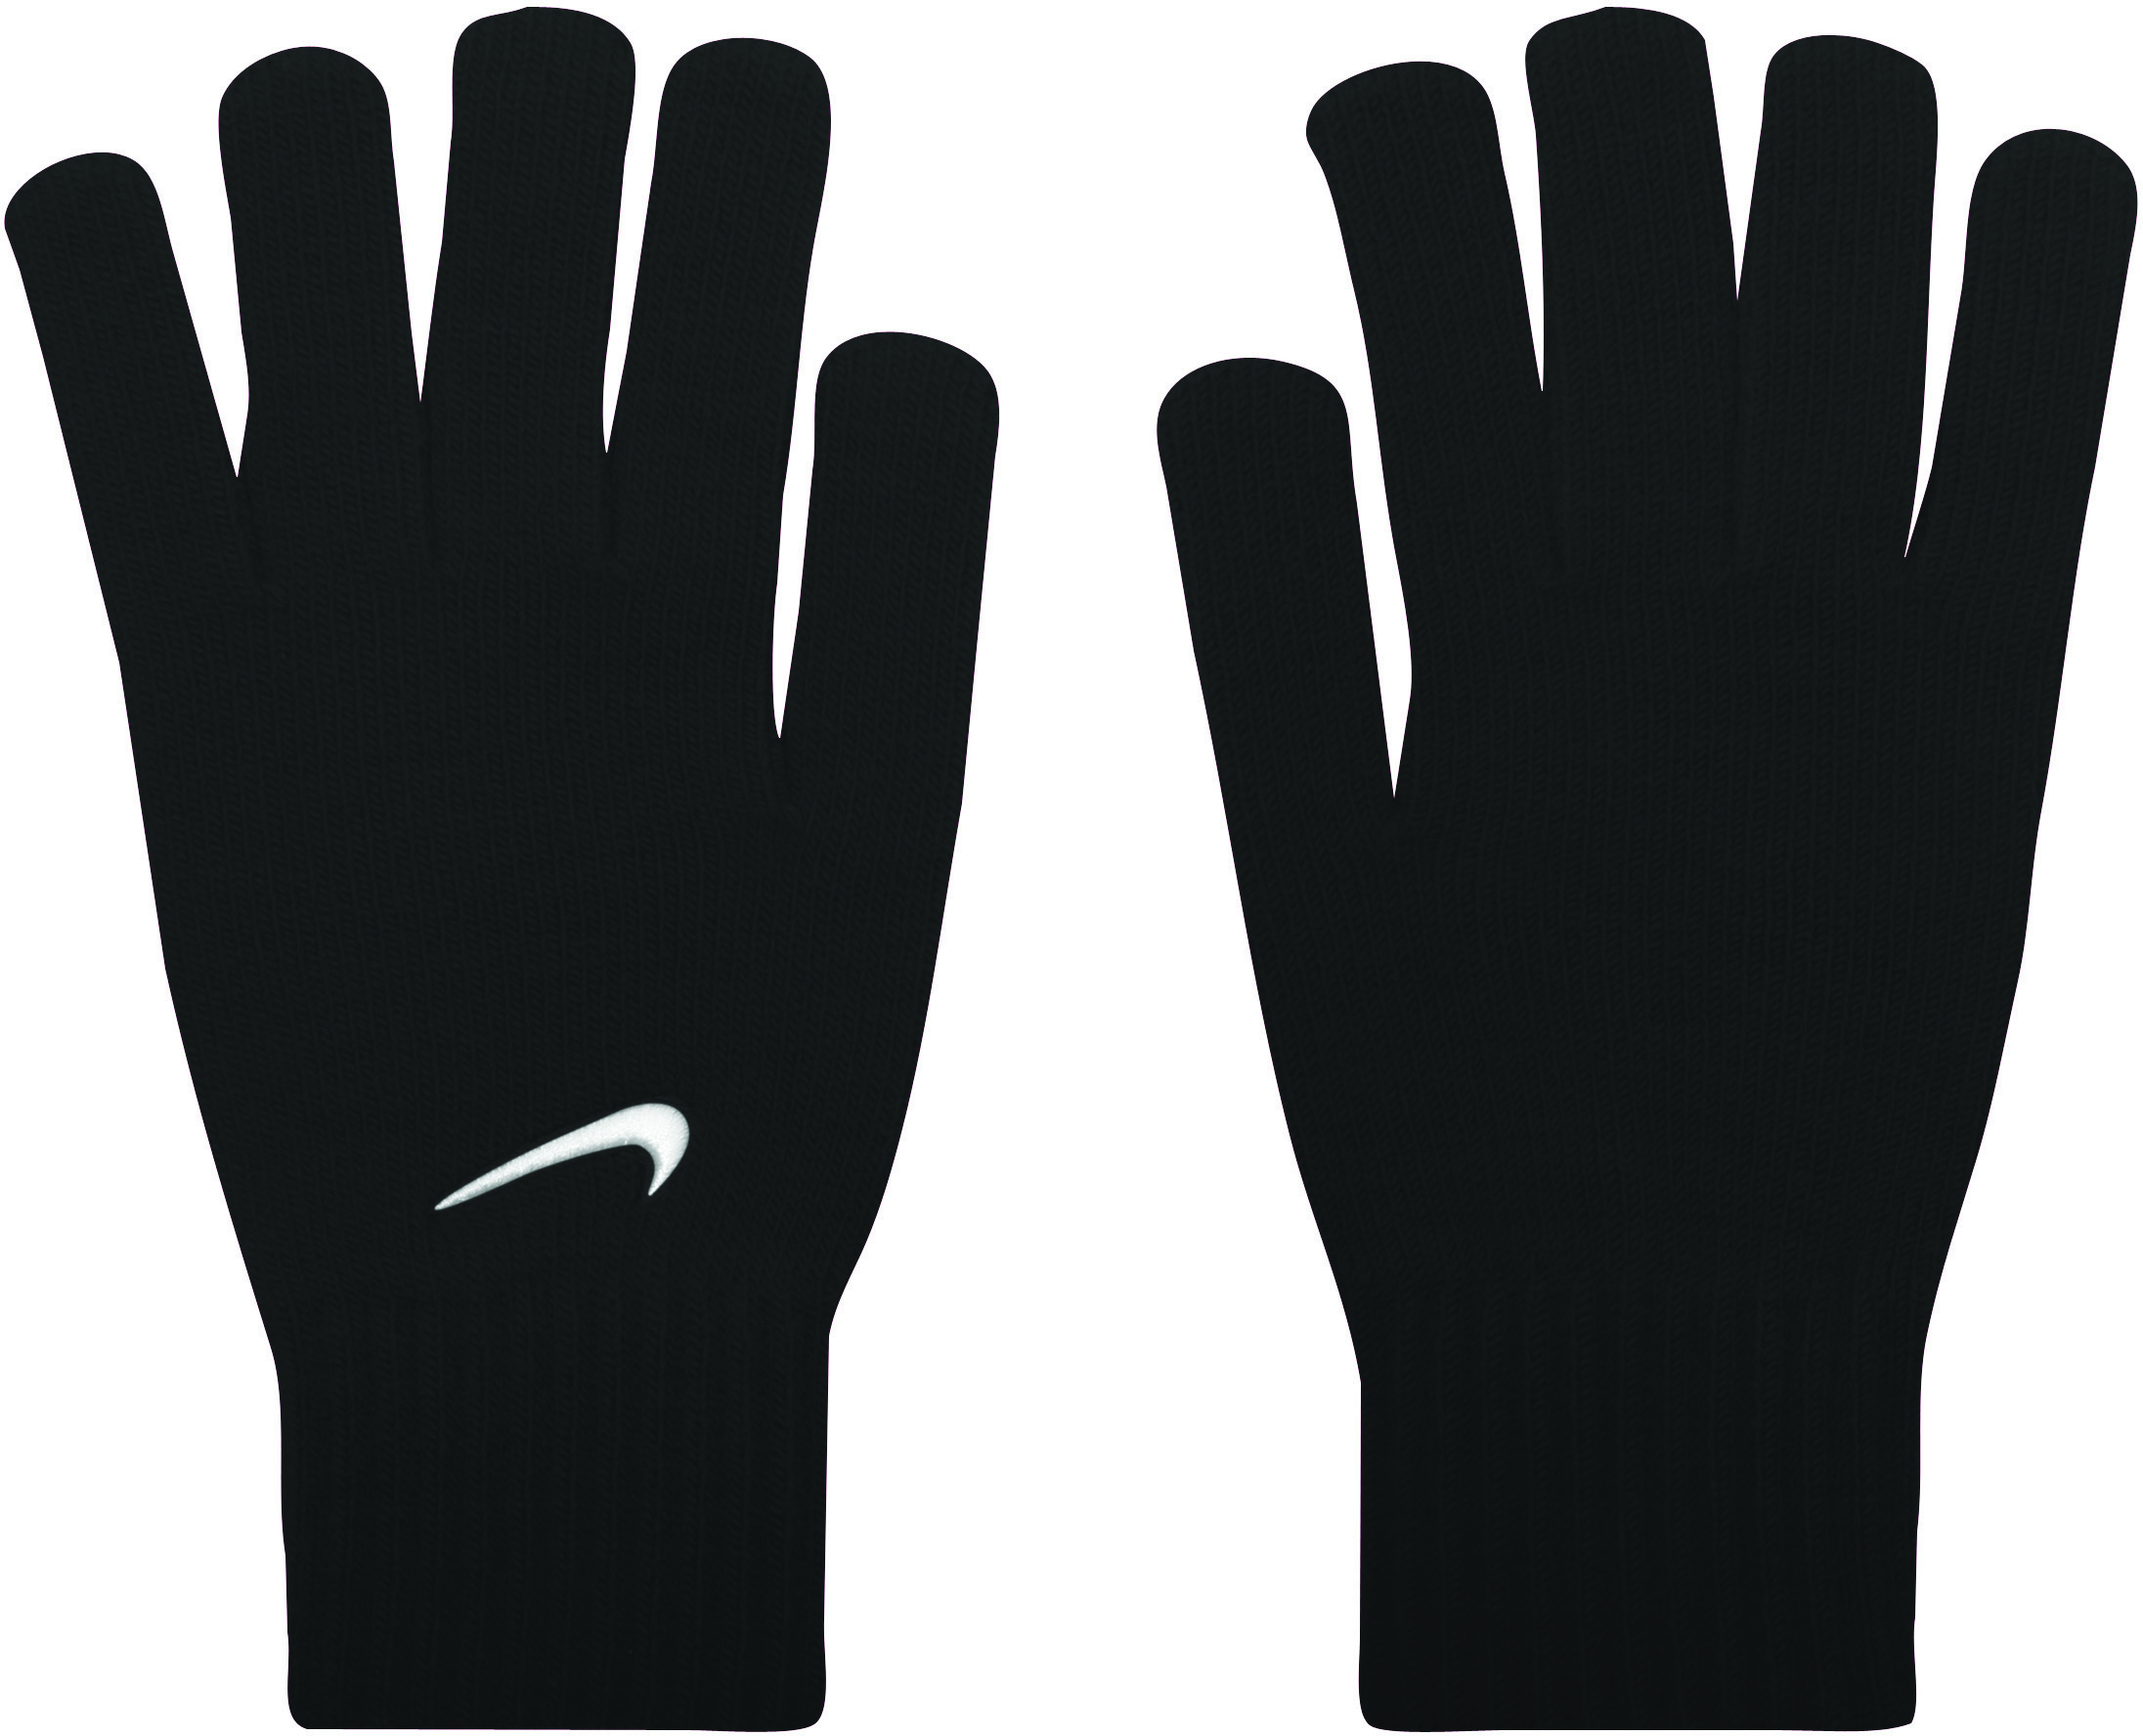 SWOOSH KNIT GLOVES - Knitted gloves